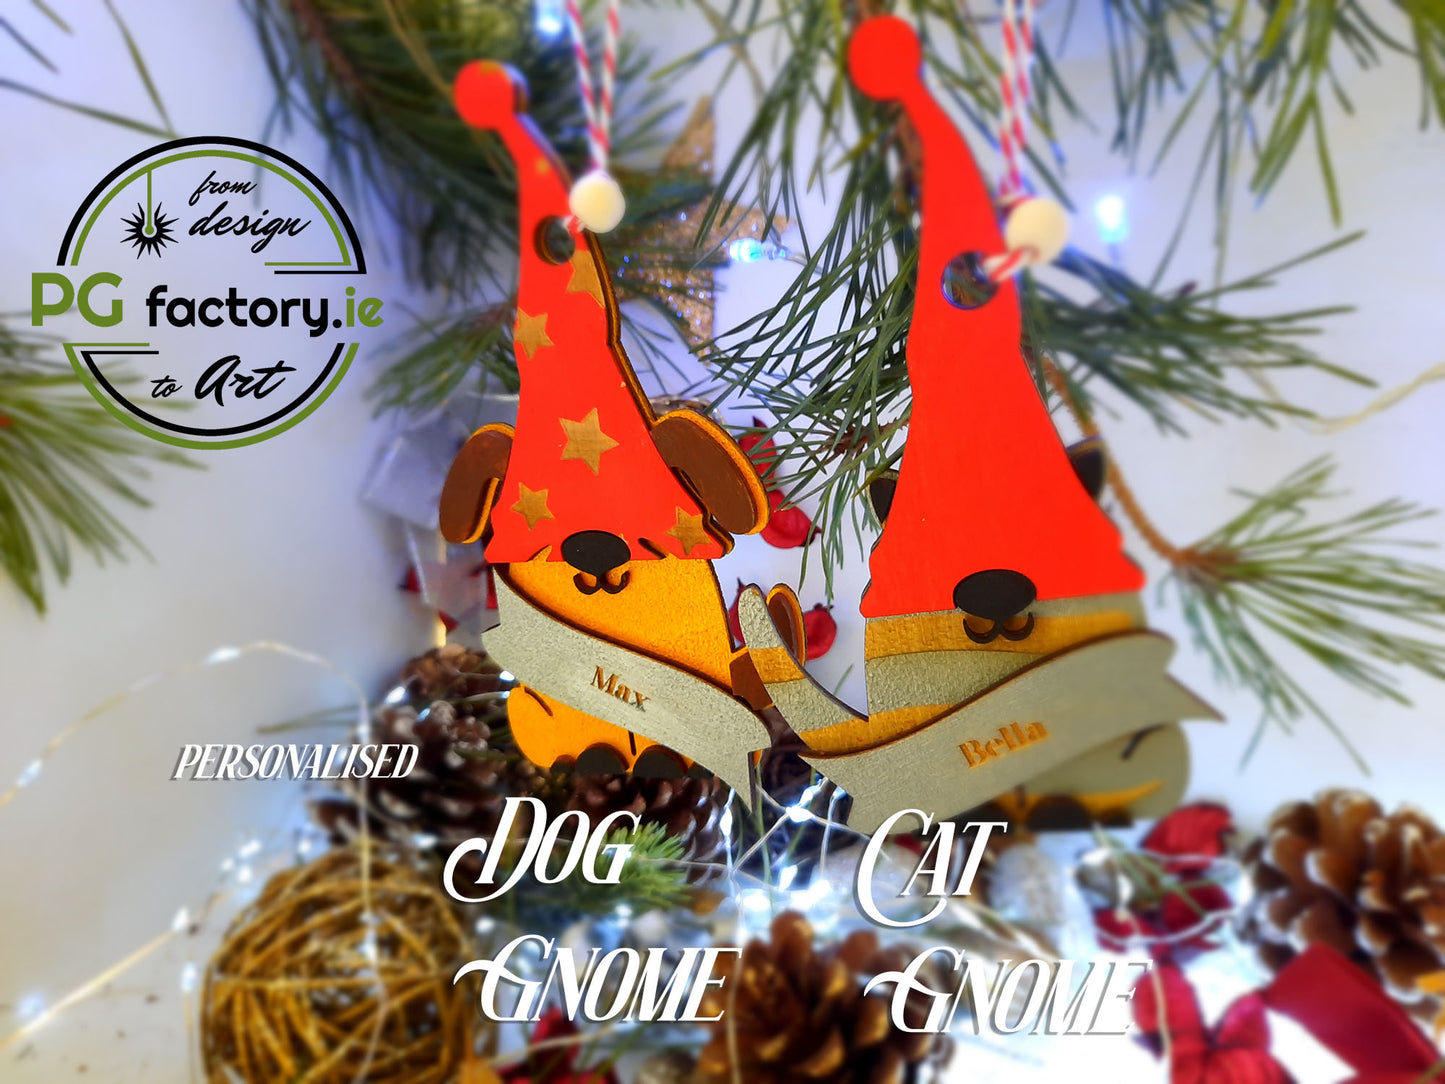 Dog Gnome - Personalised Christmas tree decoration - PG Factory